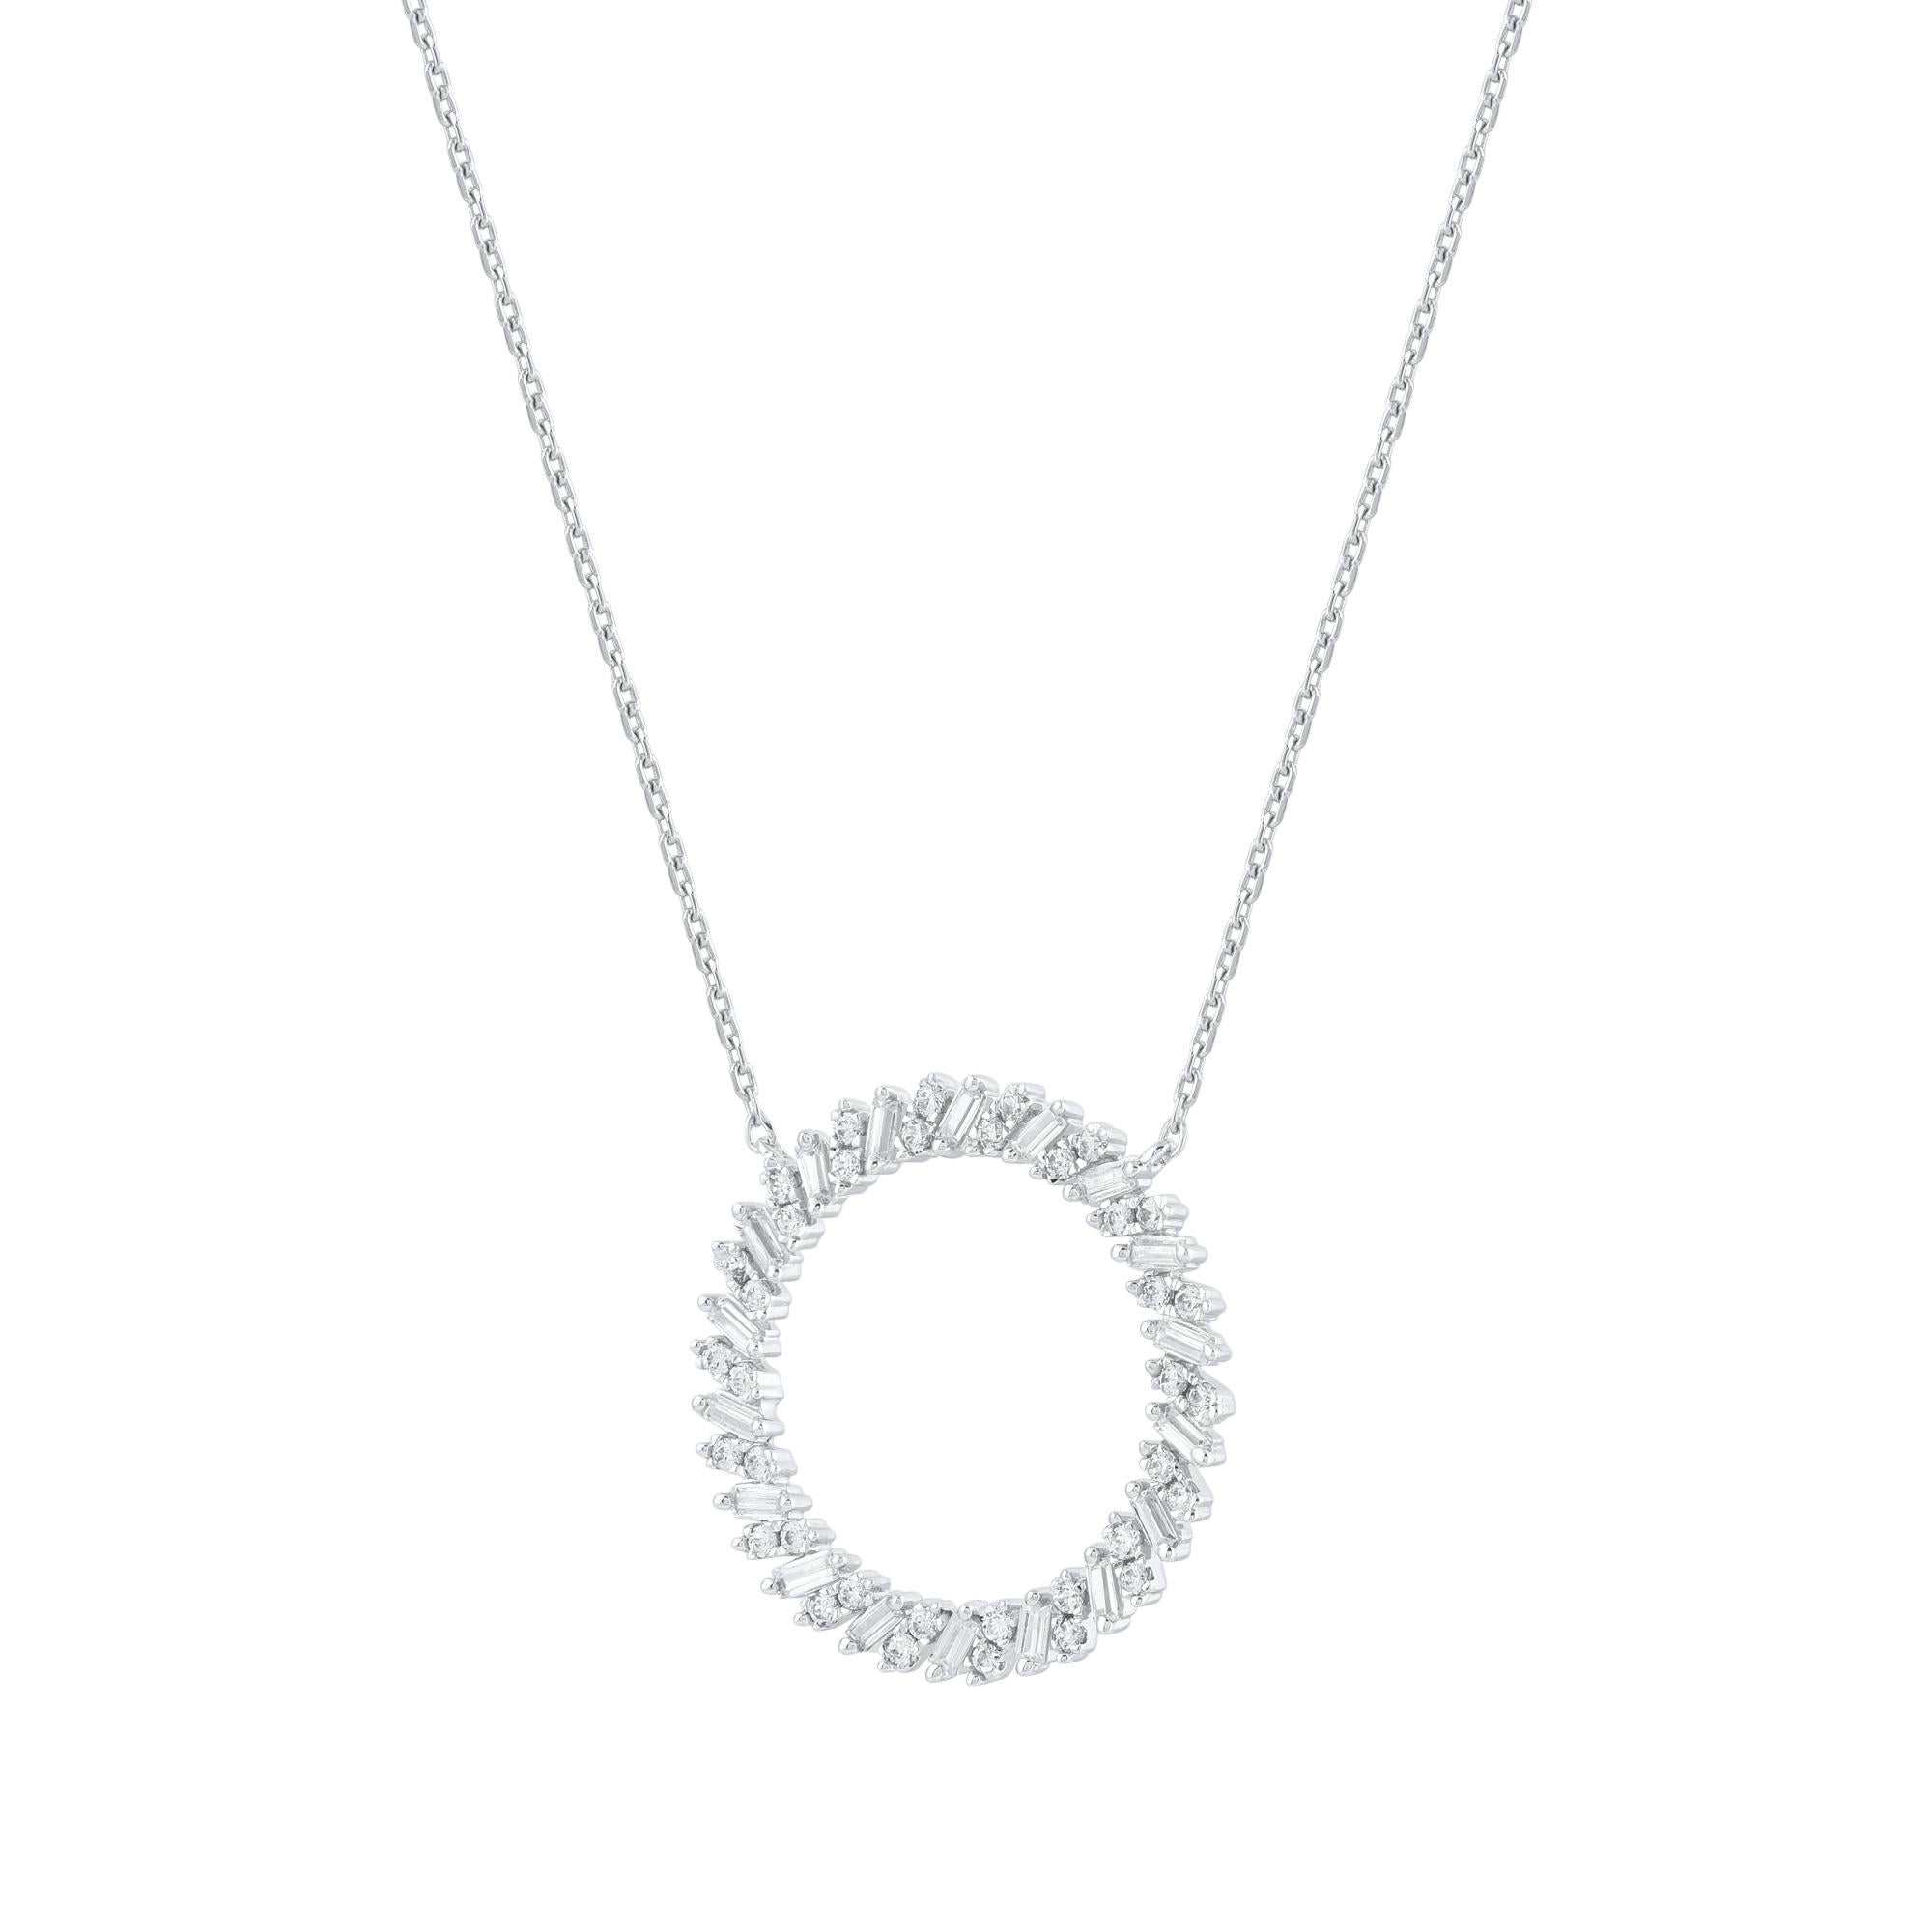 This diamond open circle eternity pendant fits any occasion with ease. These eternity pendants are studded with 54 single cut and baguette cut natural diamonds in prong setting in 18kt white gold. Diamonds are graded as H-I color and I-2 clarity.